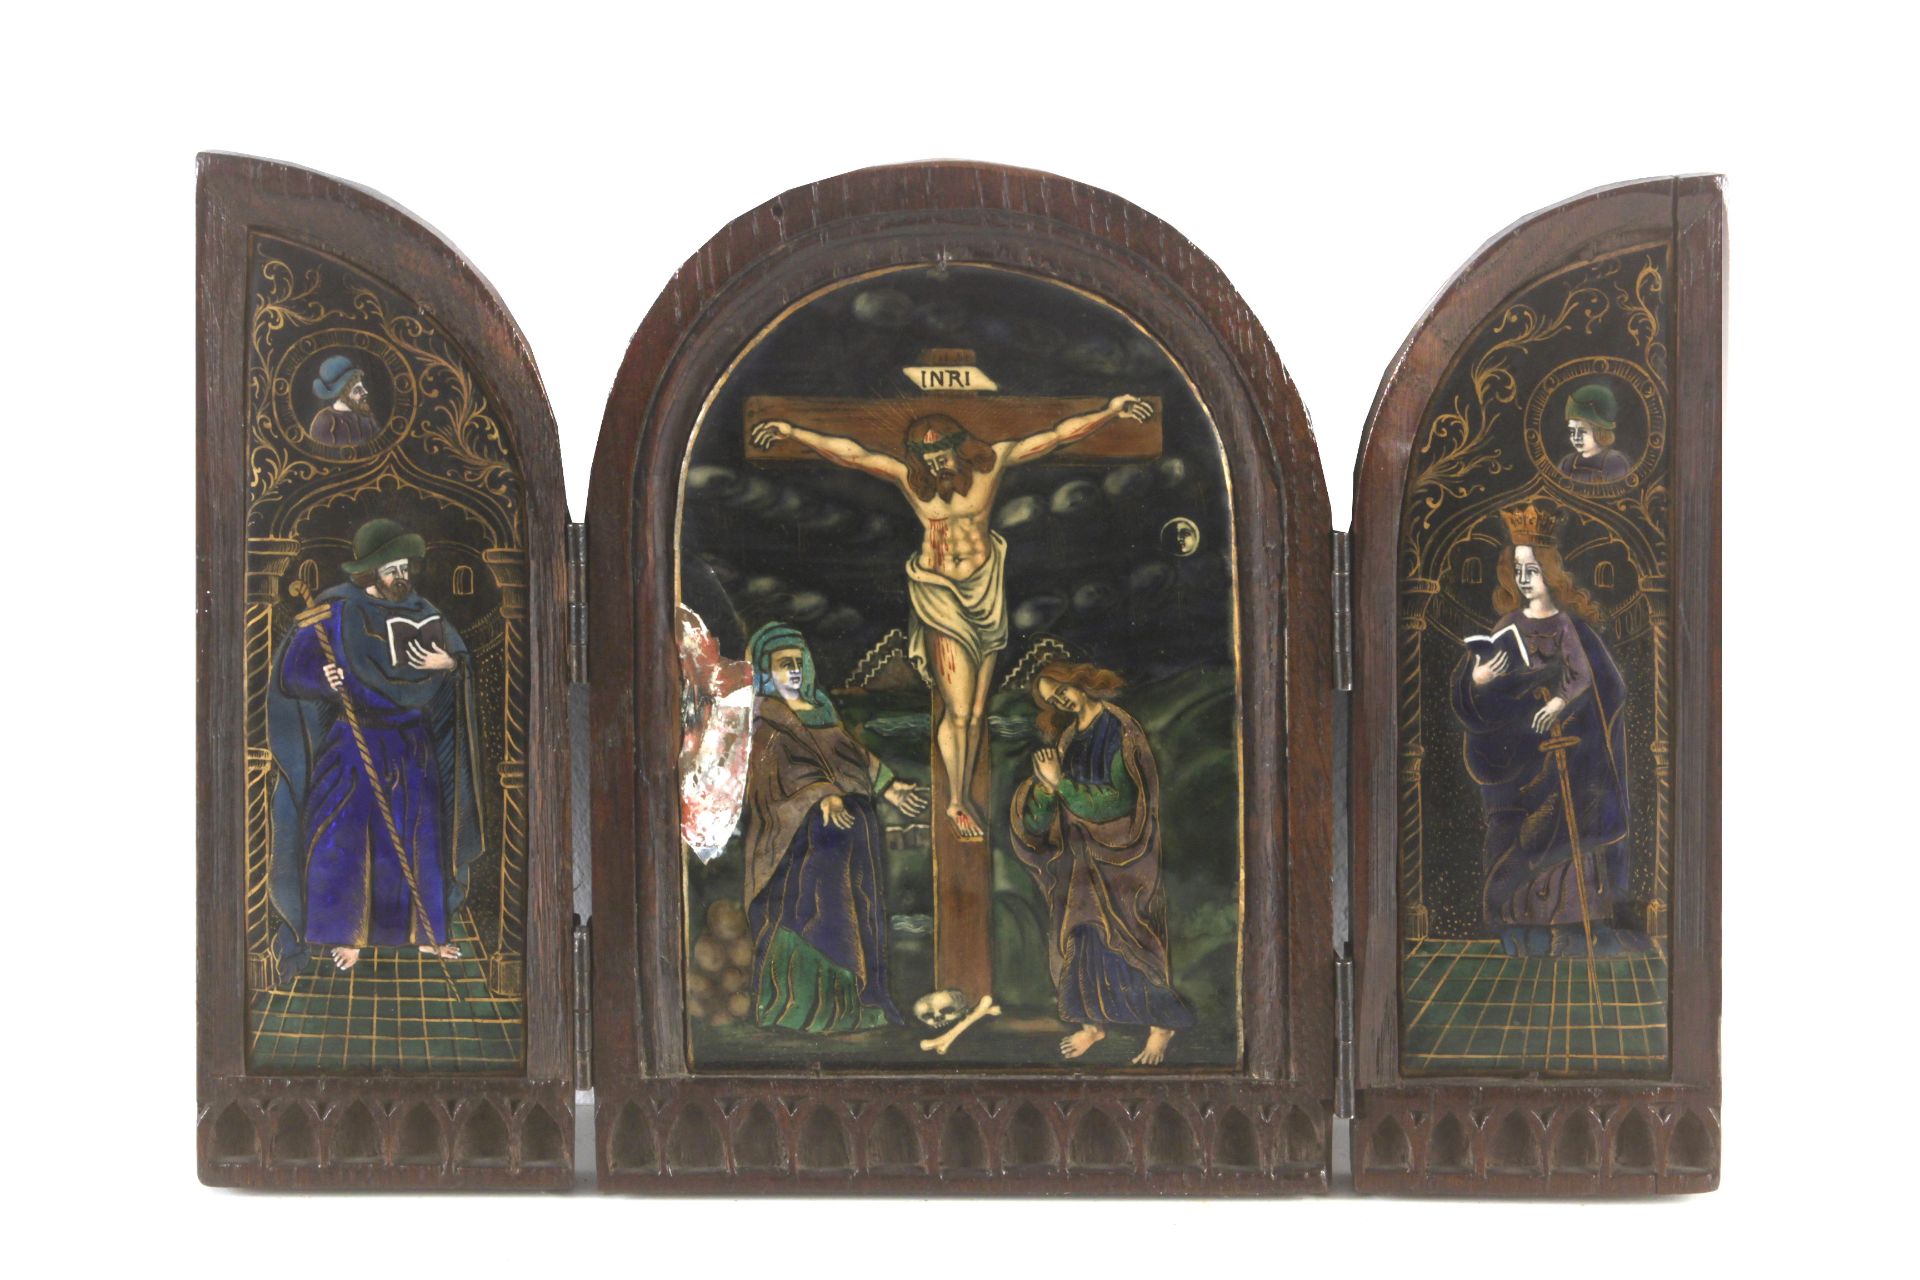 A 19th century Neo-Gothic triptych with Limoges enamels